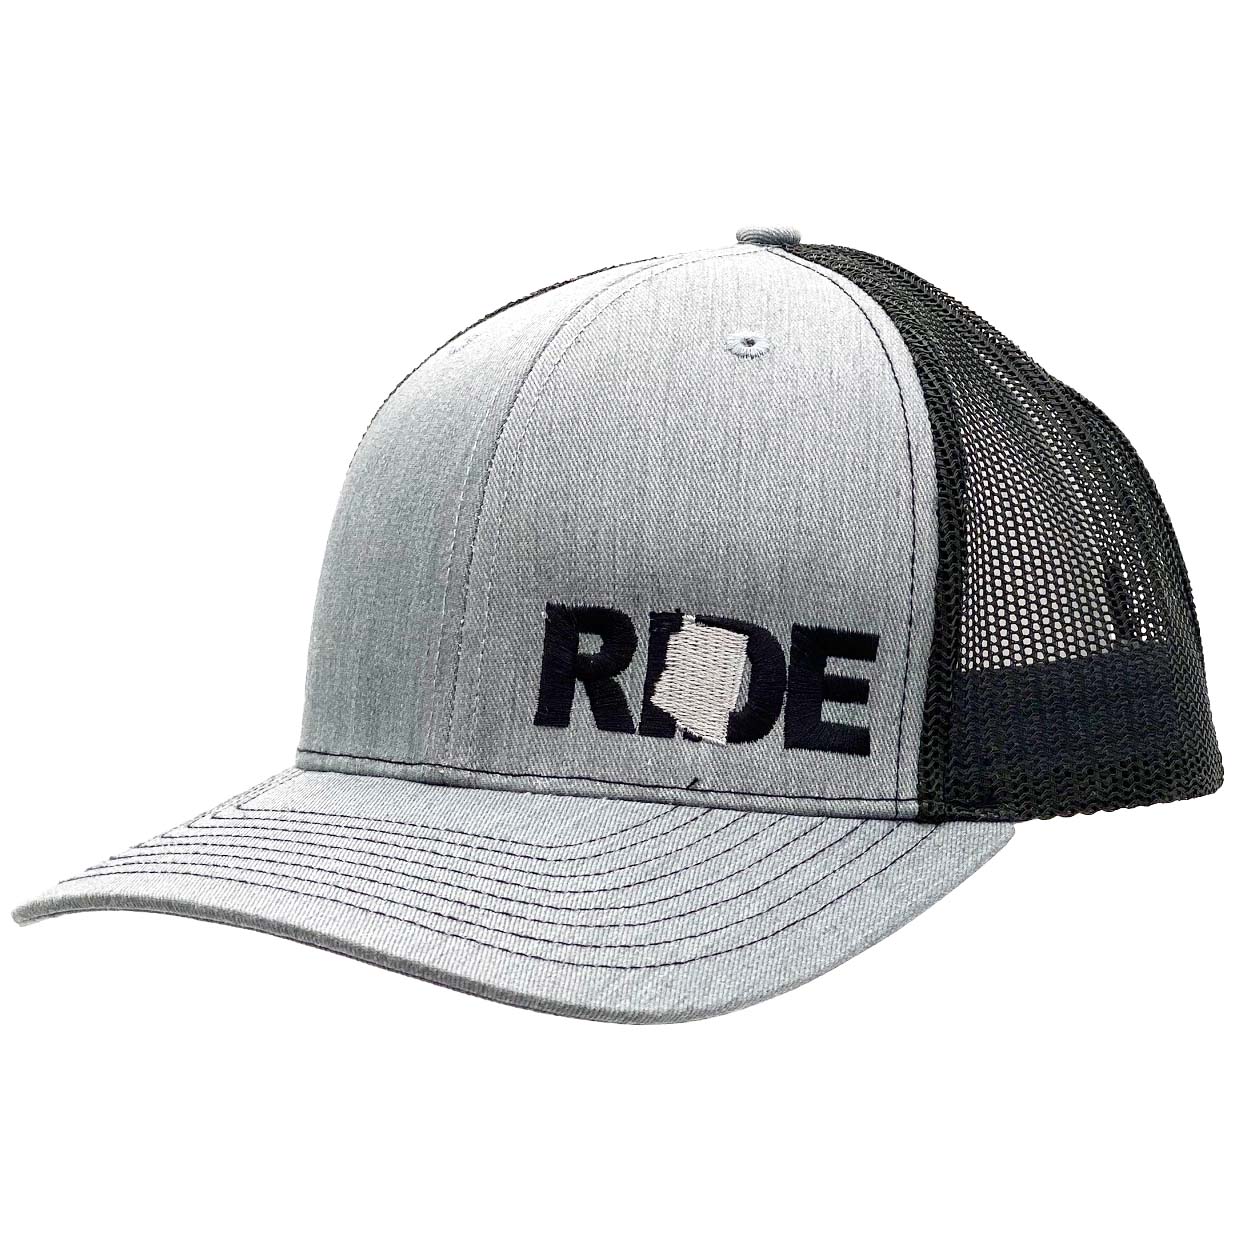 Ride Arizona Classic Pro Night Out Embroidered Snapback Trucker Hat Heather Gray/Black